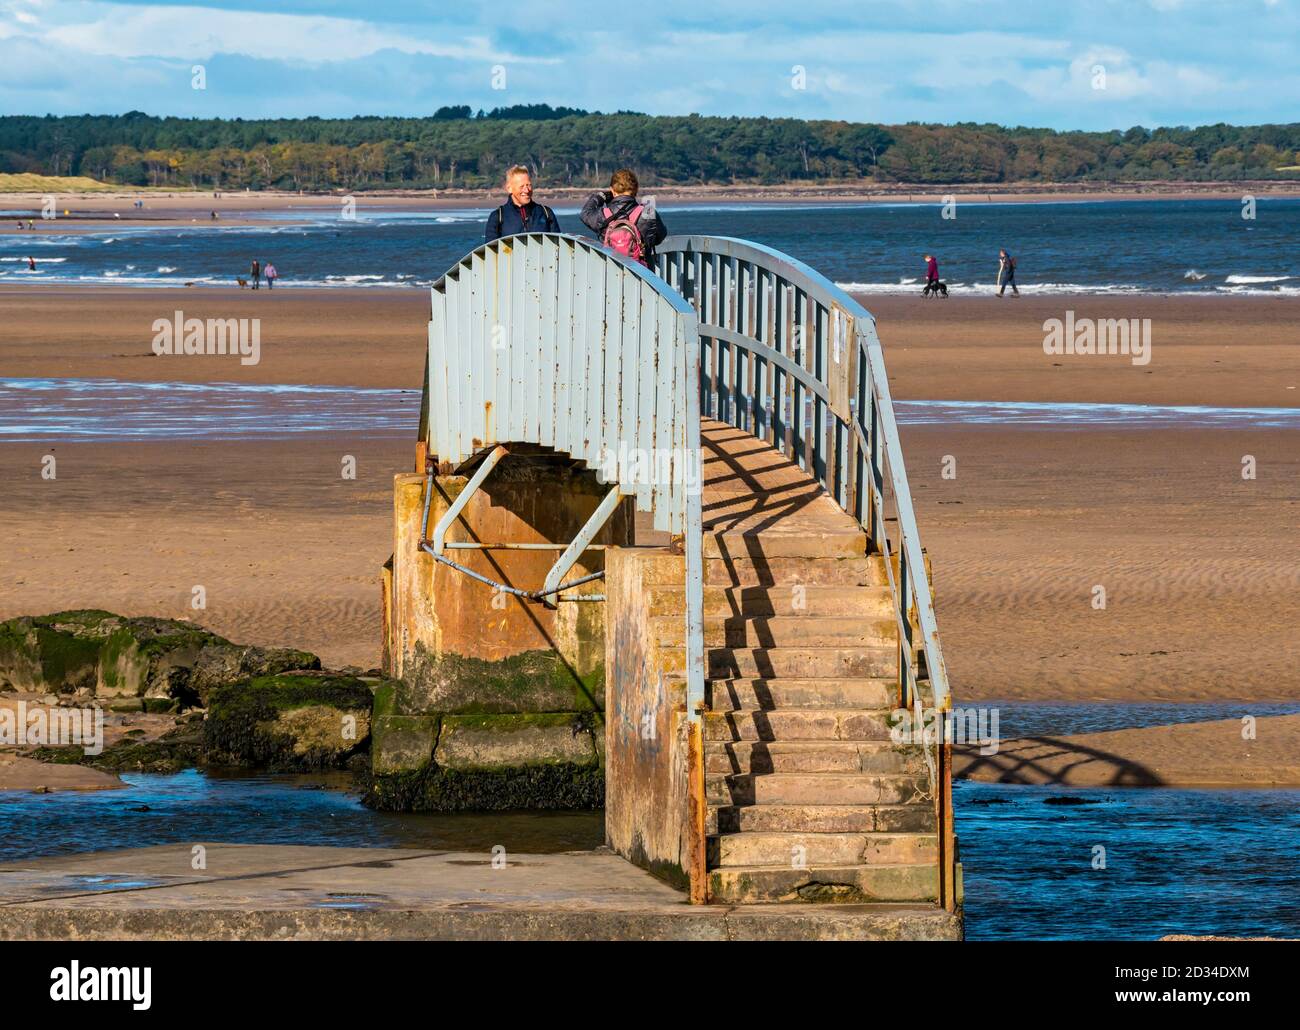 Belhaven, East Lothian, Scotland, United Kingdom, 7th October 2020. UK Weather: sunshine on the Bridge to Nowhere. The bridge over the Biel Water is only accessible at low tide for visitors to the beach at Belhaven Bay. A couple walk over the unusual bridge Stock Photo